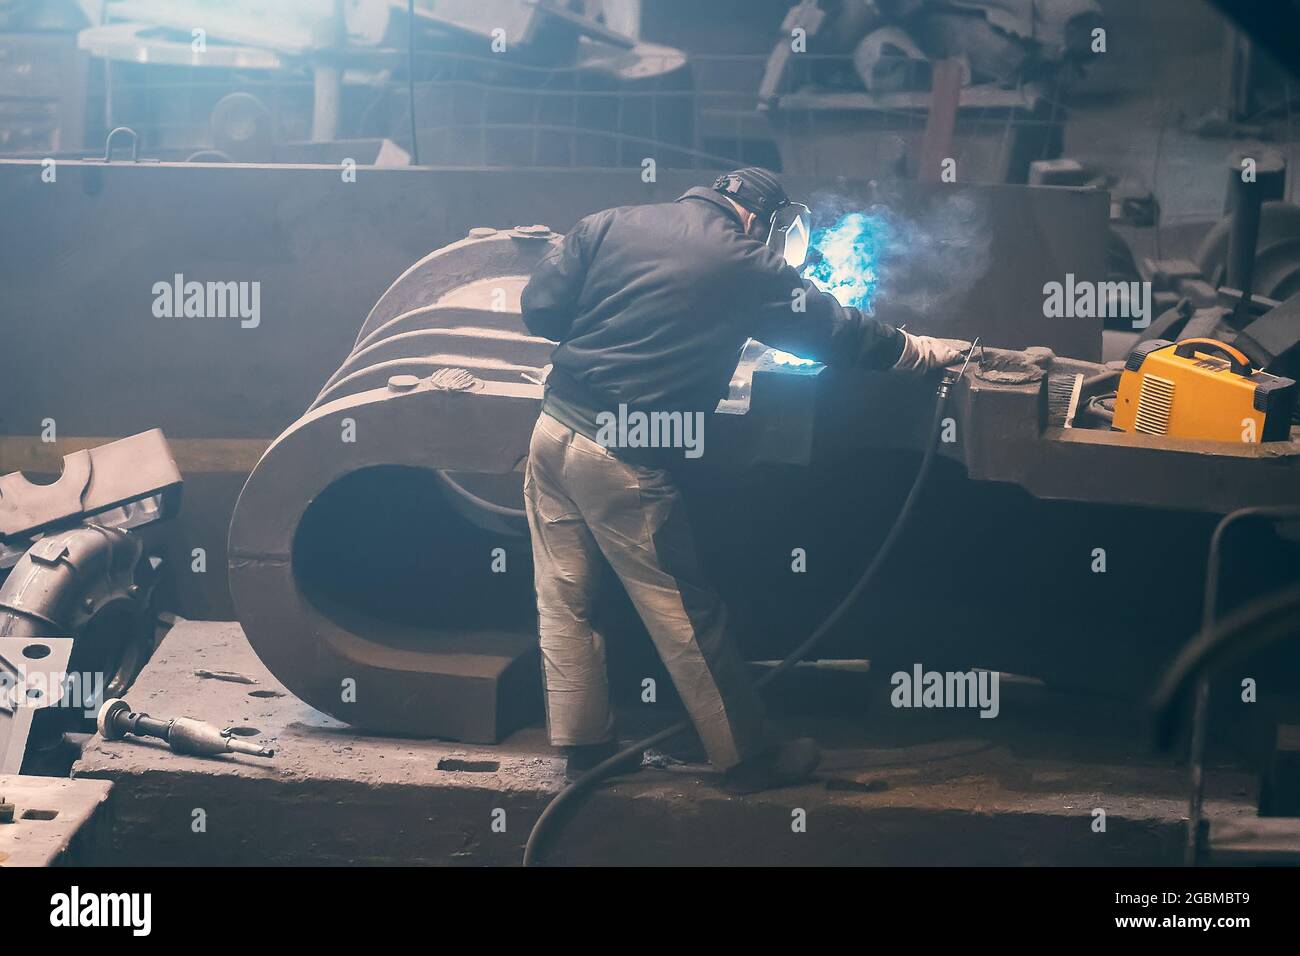 Welder processes large cast iron part in metallurgical plant after it has been melted or manufactured. Stock Photo